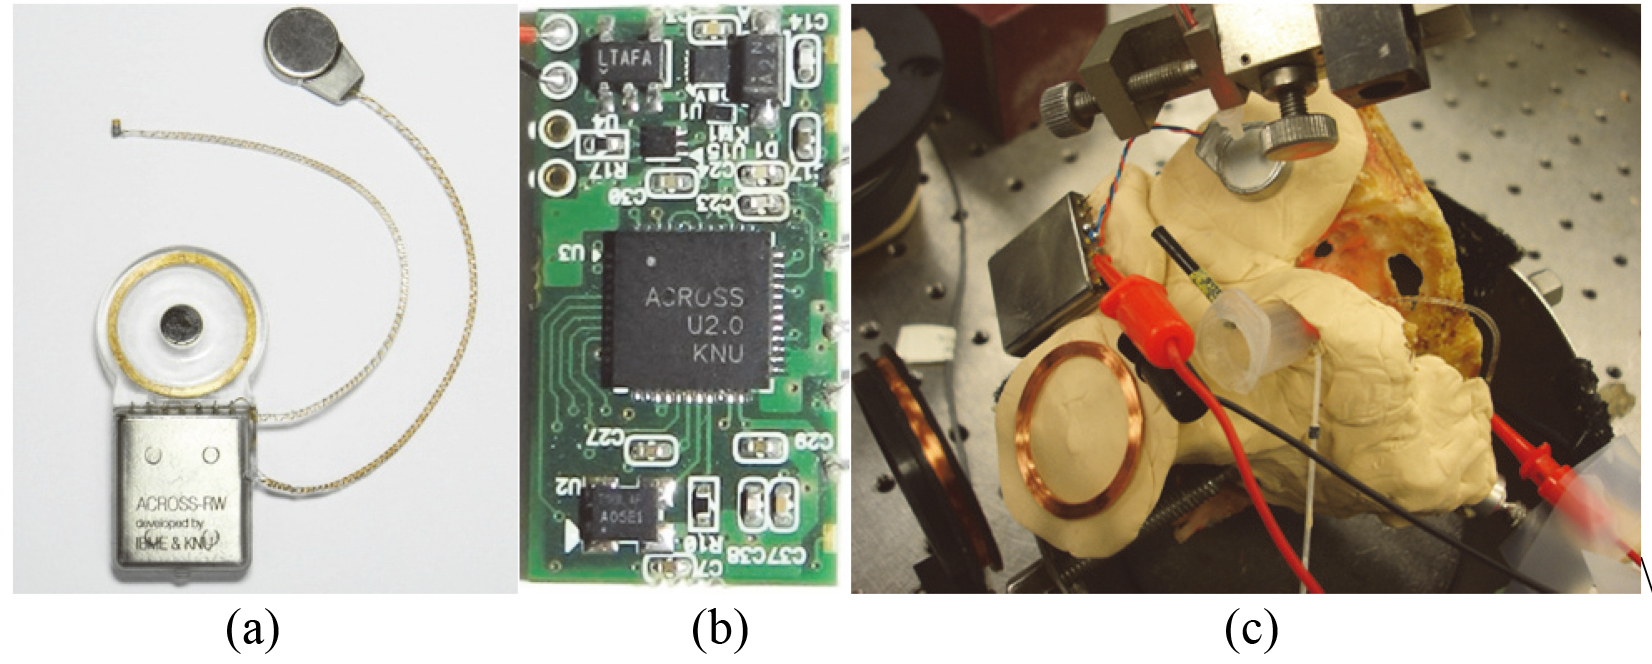 Images of (a) prototype system, (b) minimized test board, and (c) human cadaver experiments.